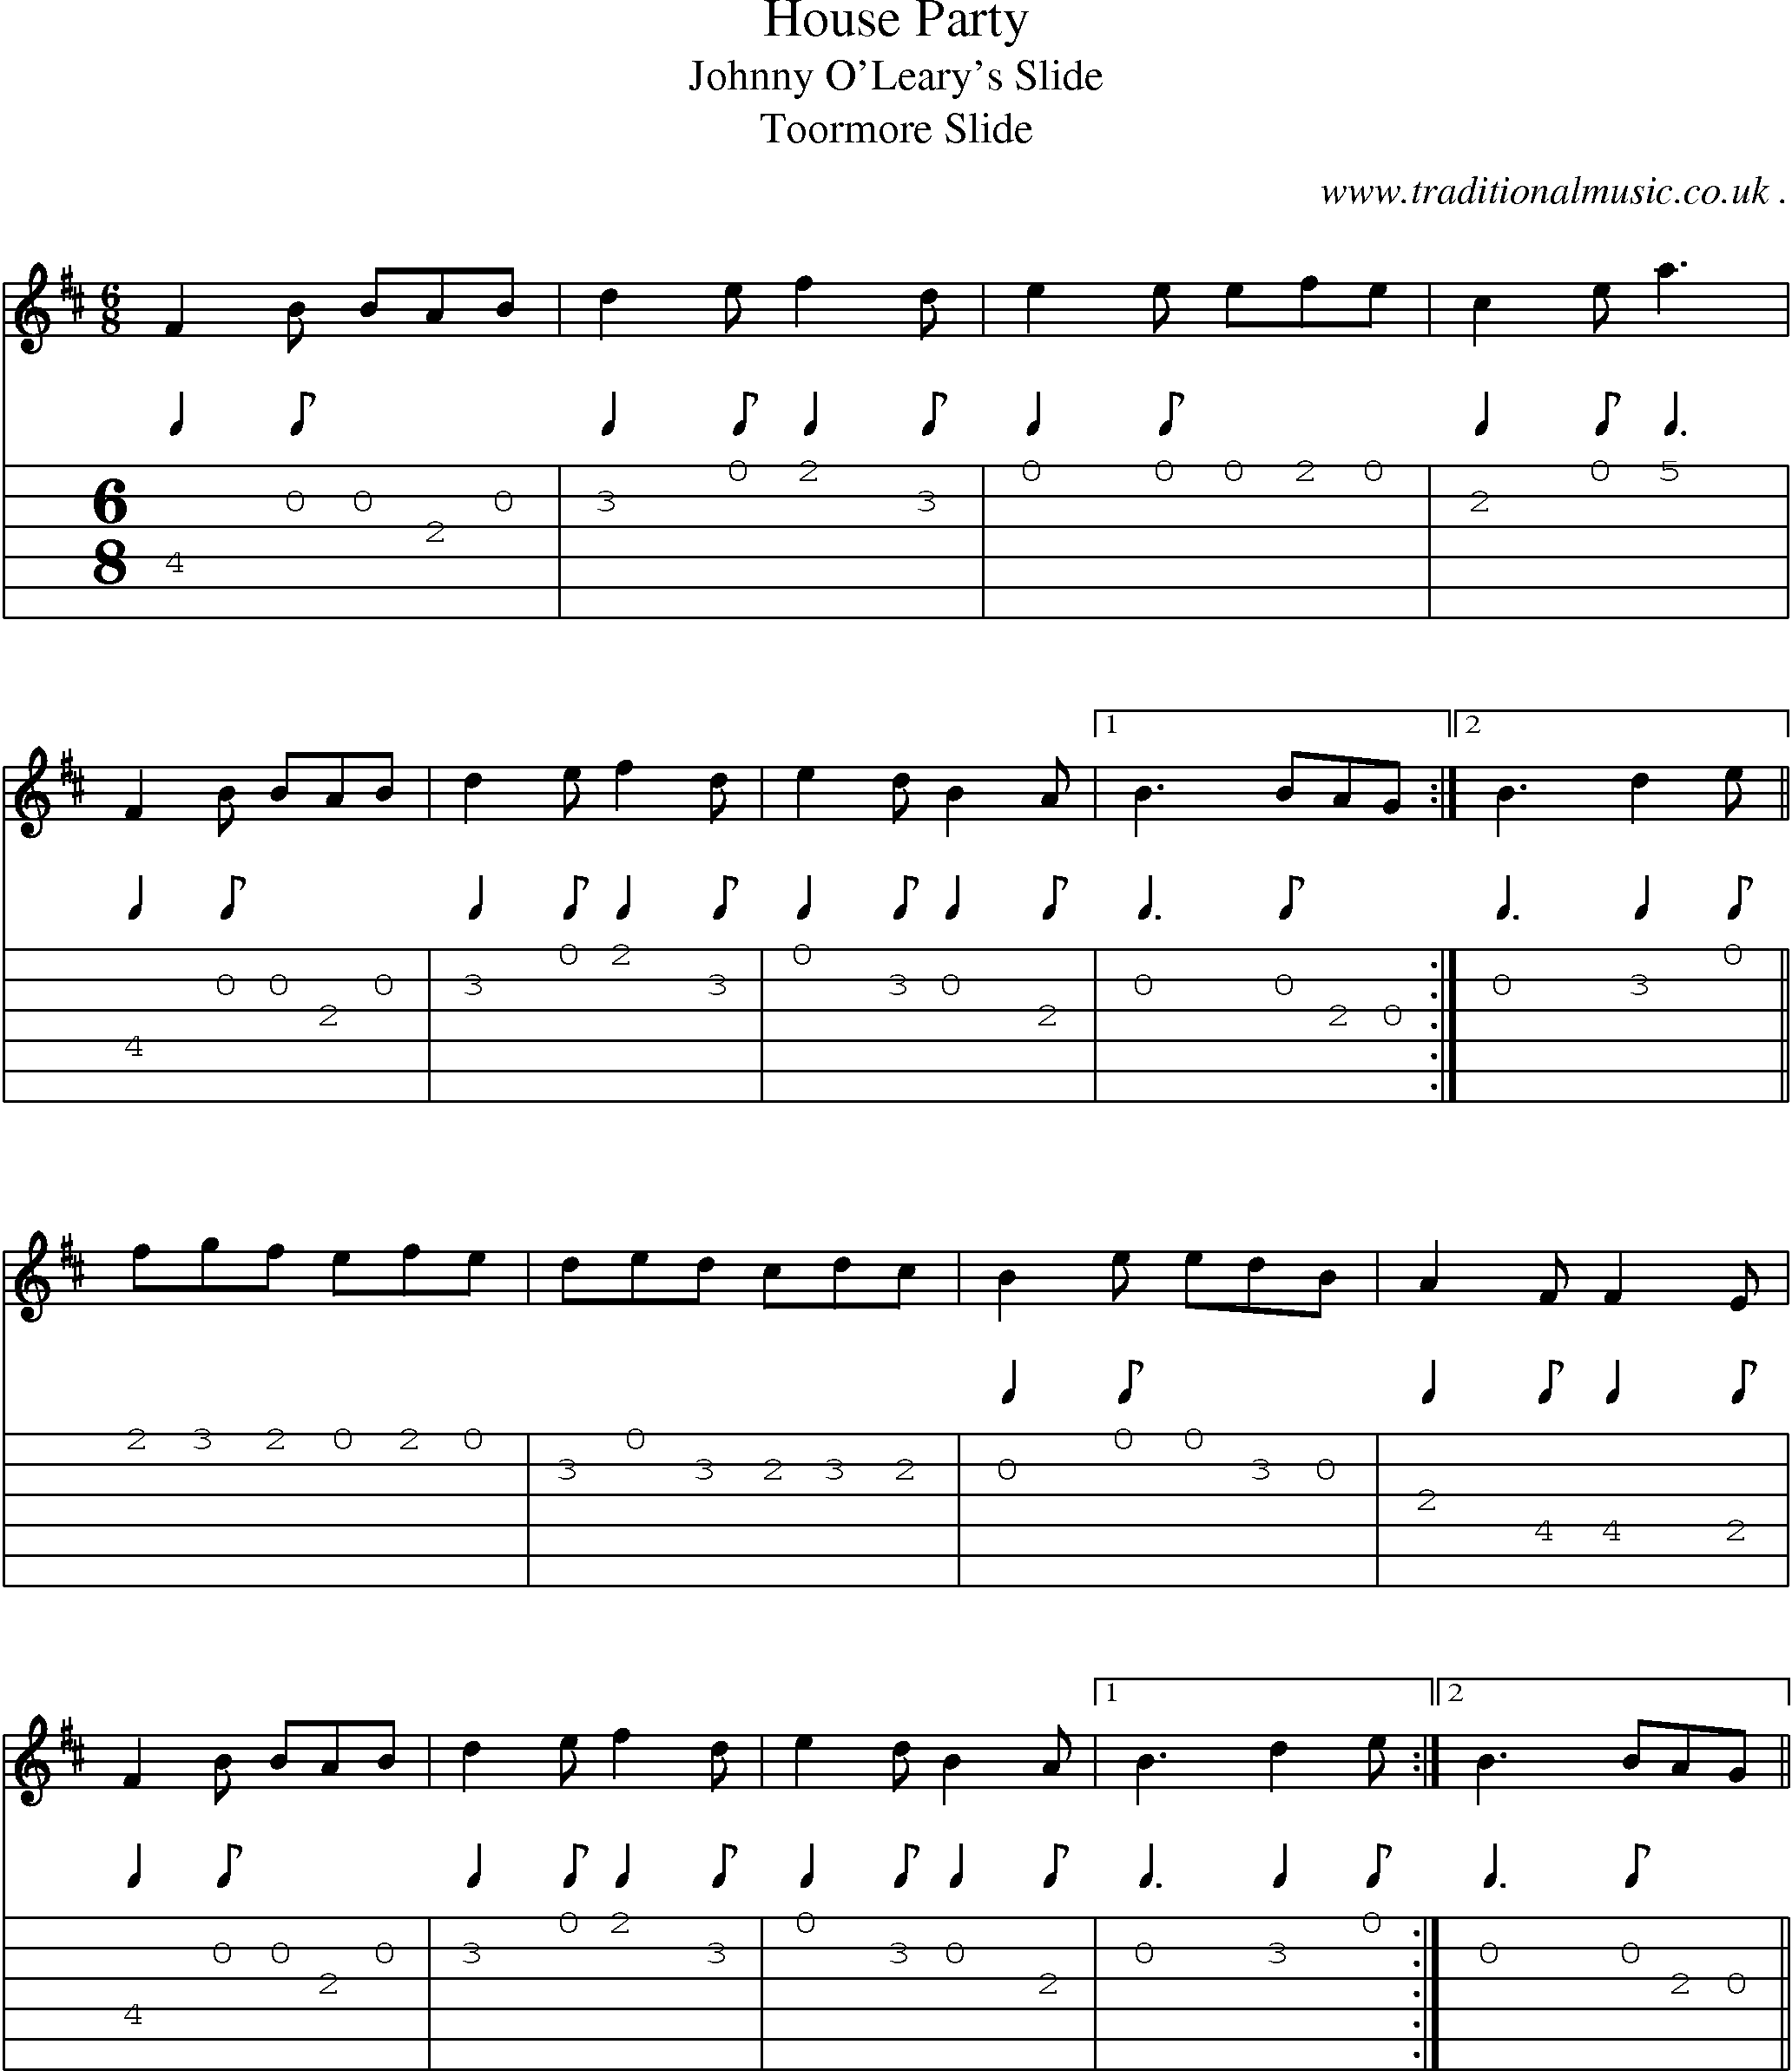 Sheet-Music and Guitar Tabs for House Party